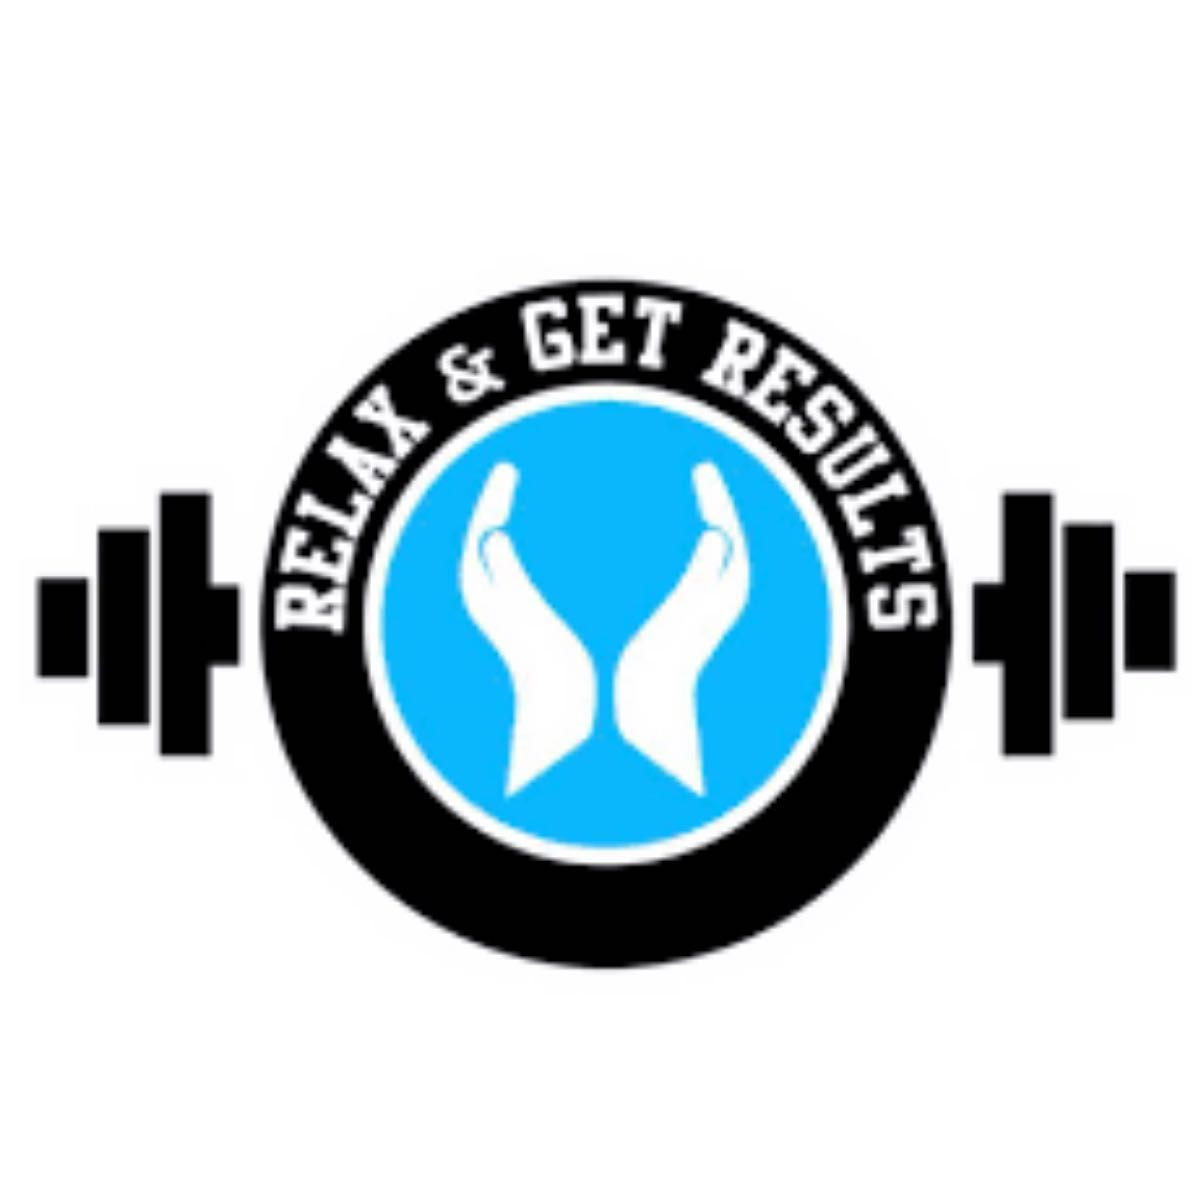 Relax and Get Results (FREAKIN FITNESS) Weston, 1728 N Commerce Pkwy, Weston, 33326